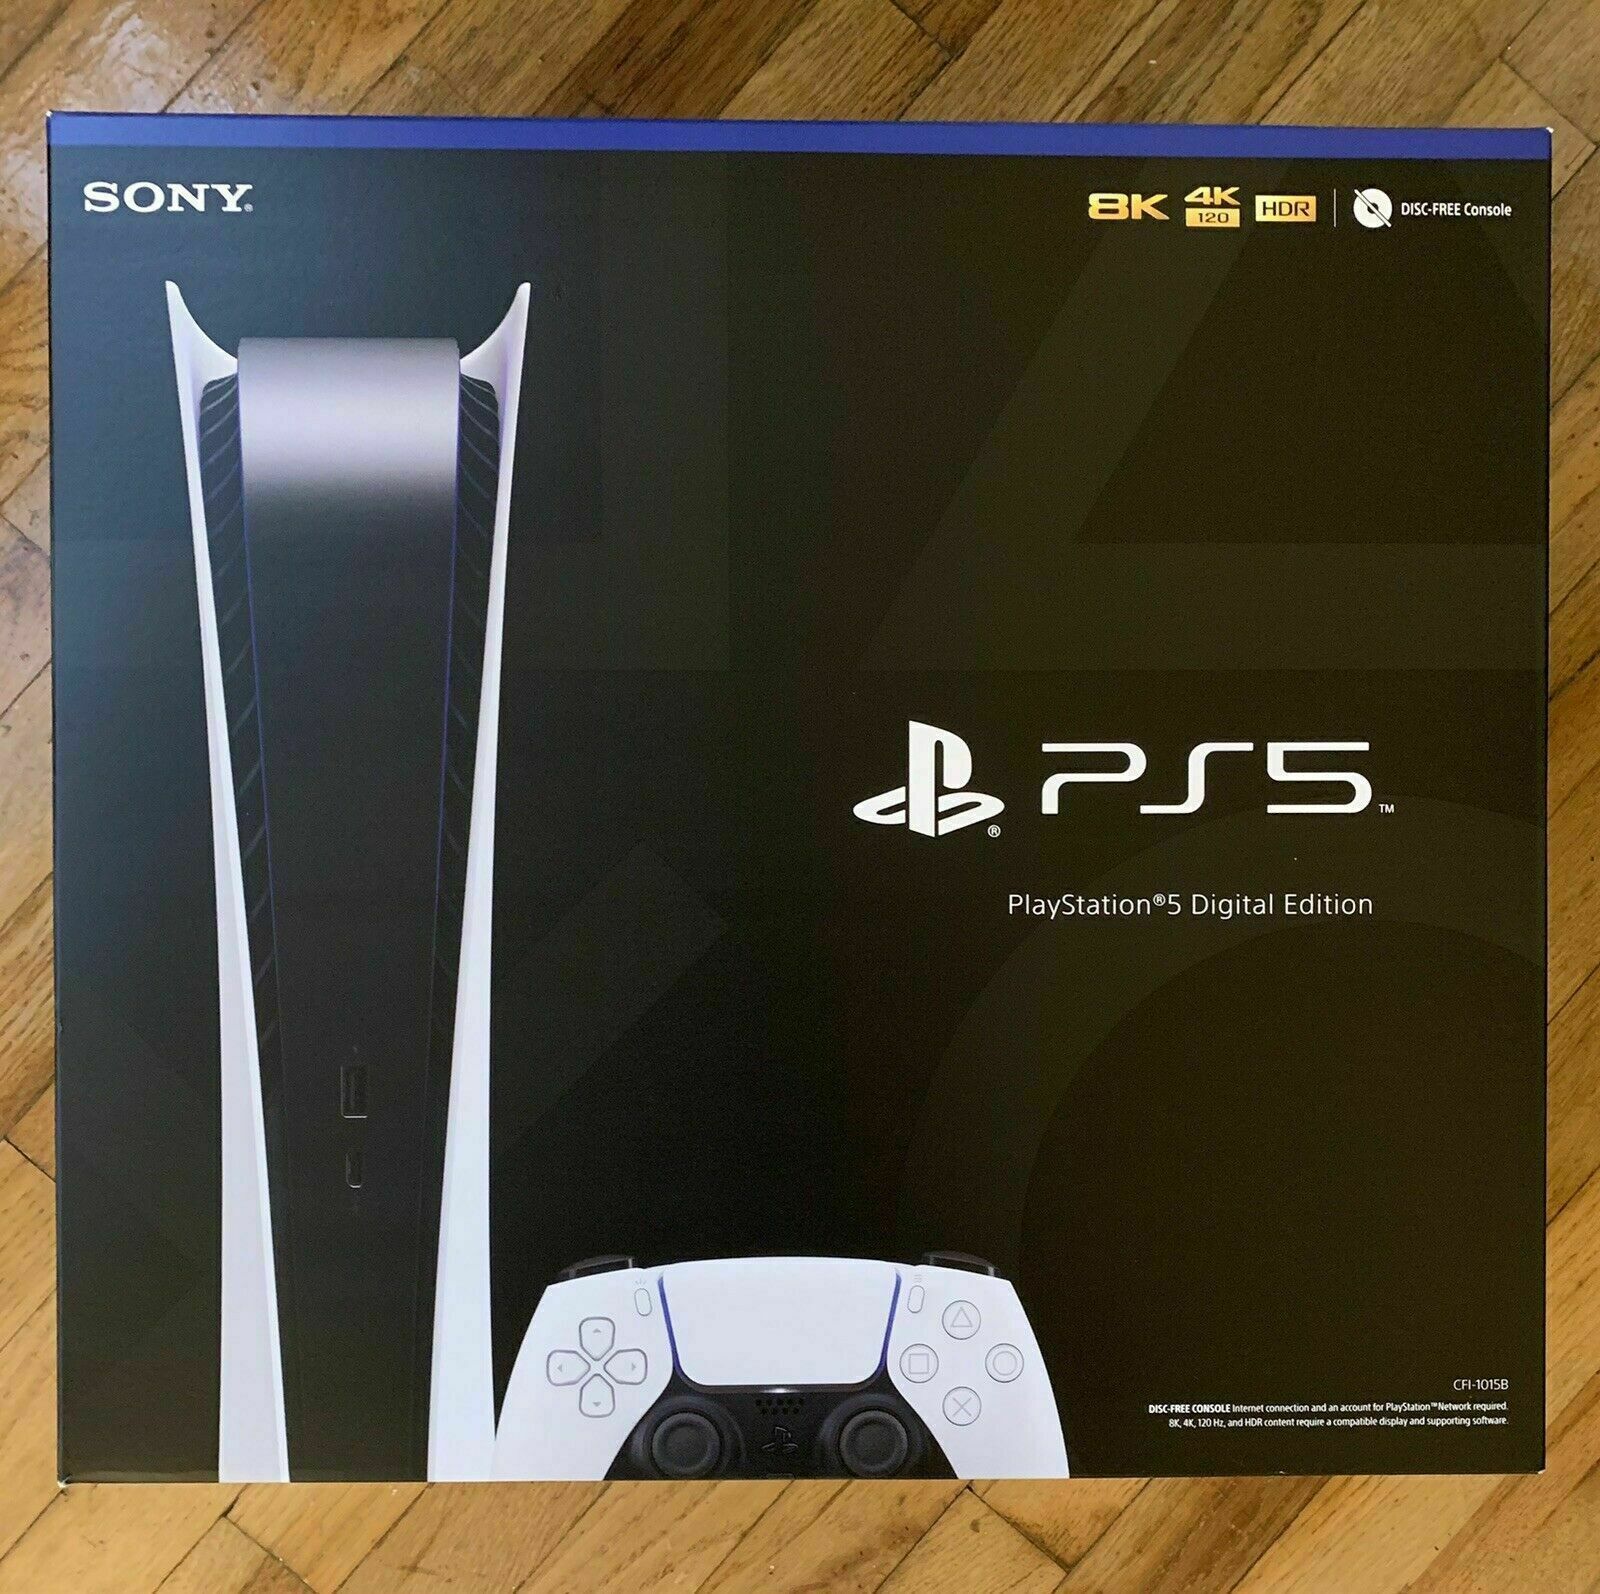 ☑️ NEW Sony Playstation PS 5 Digital Edition Console System (SHIPS THE NEXT DAY)